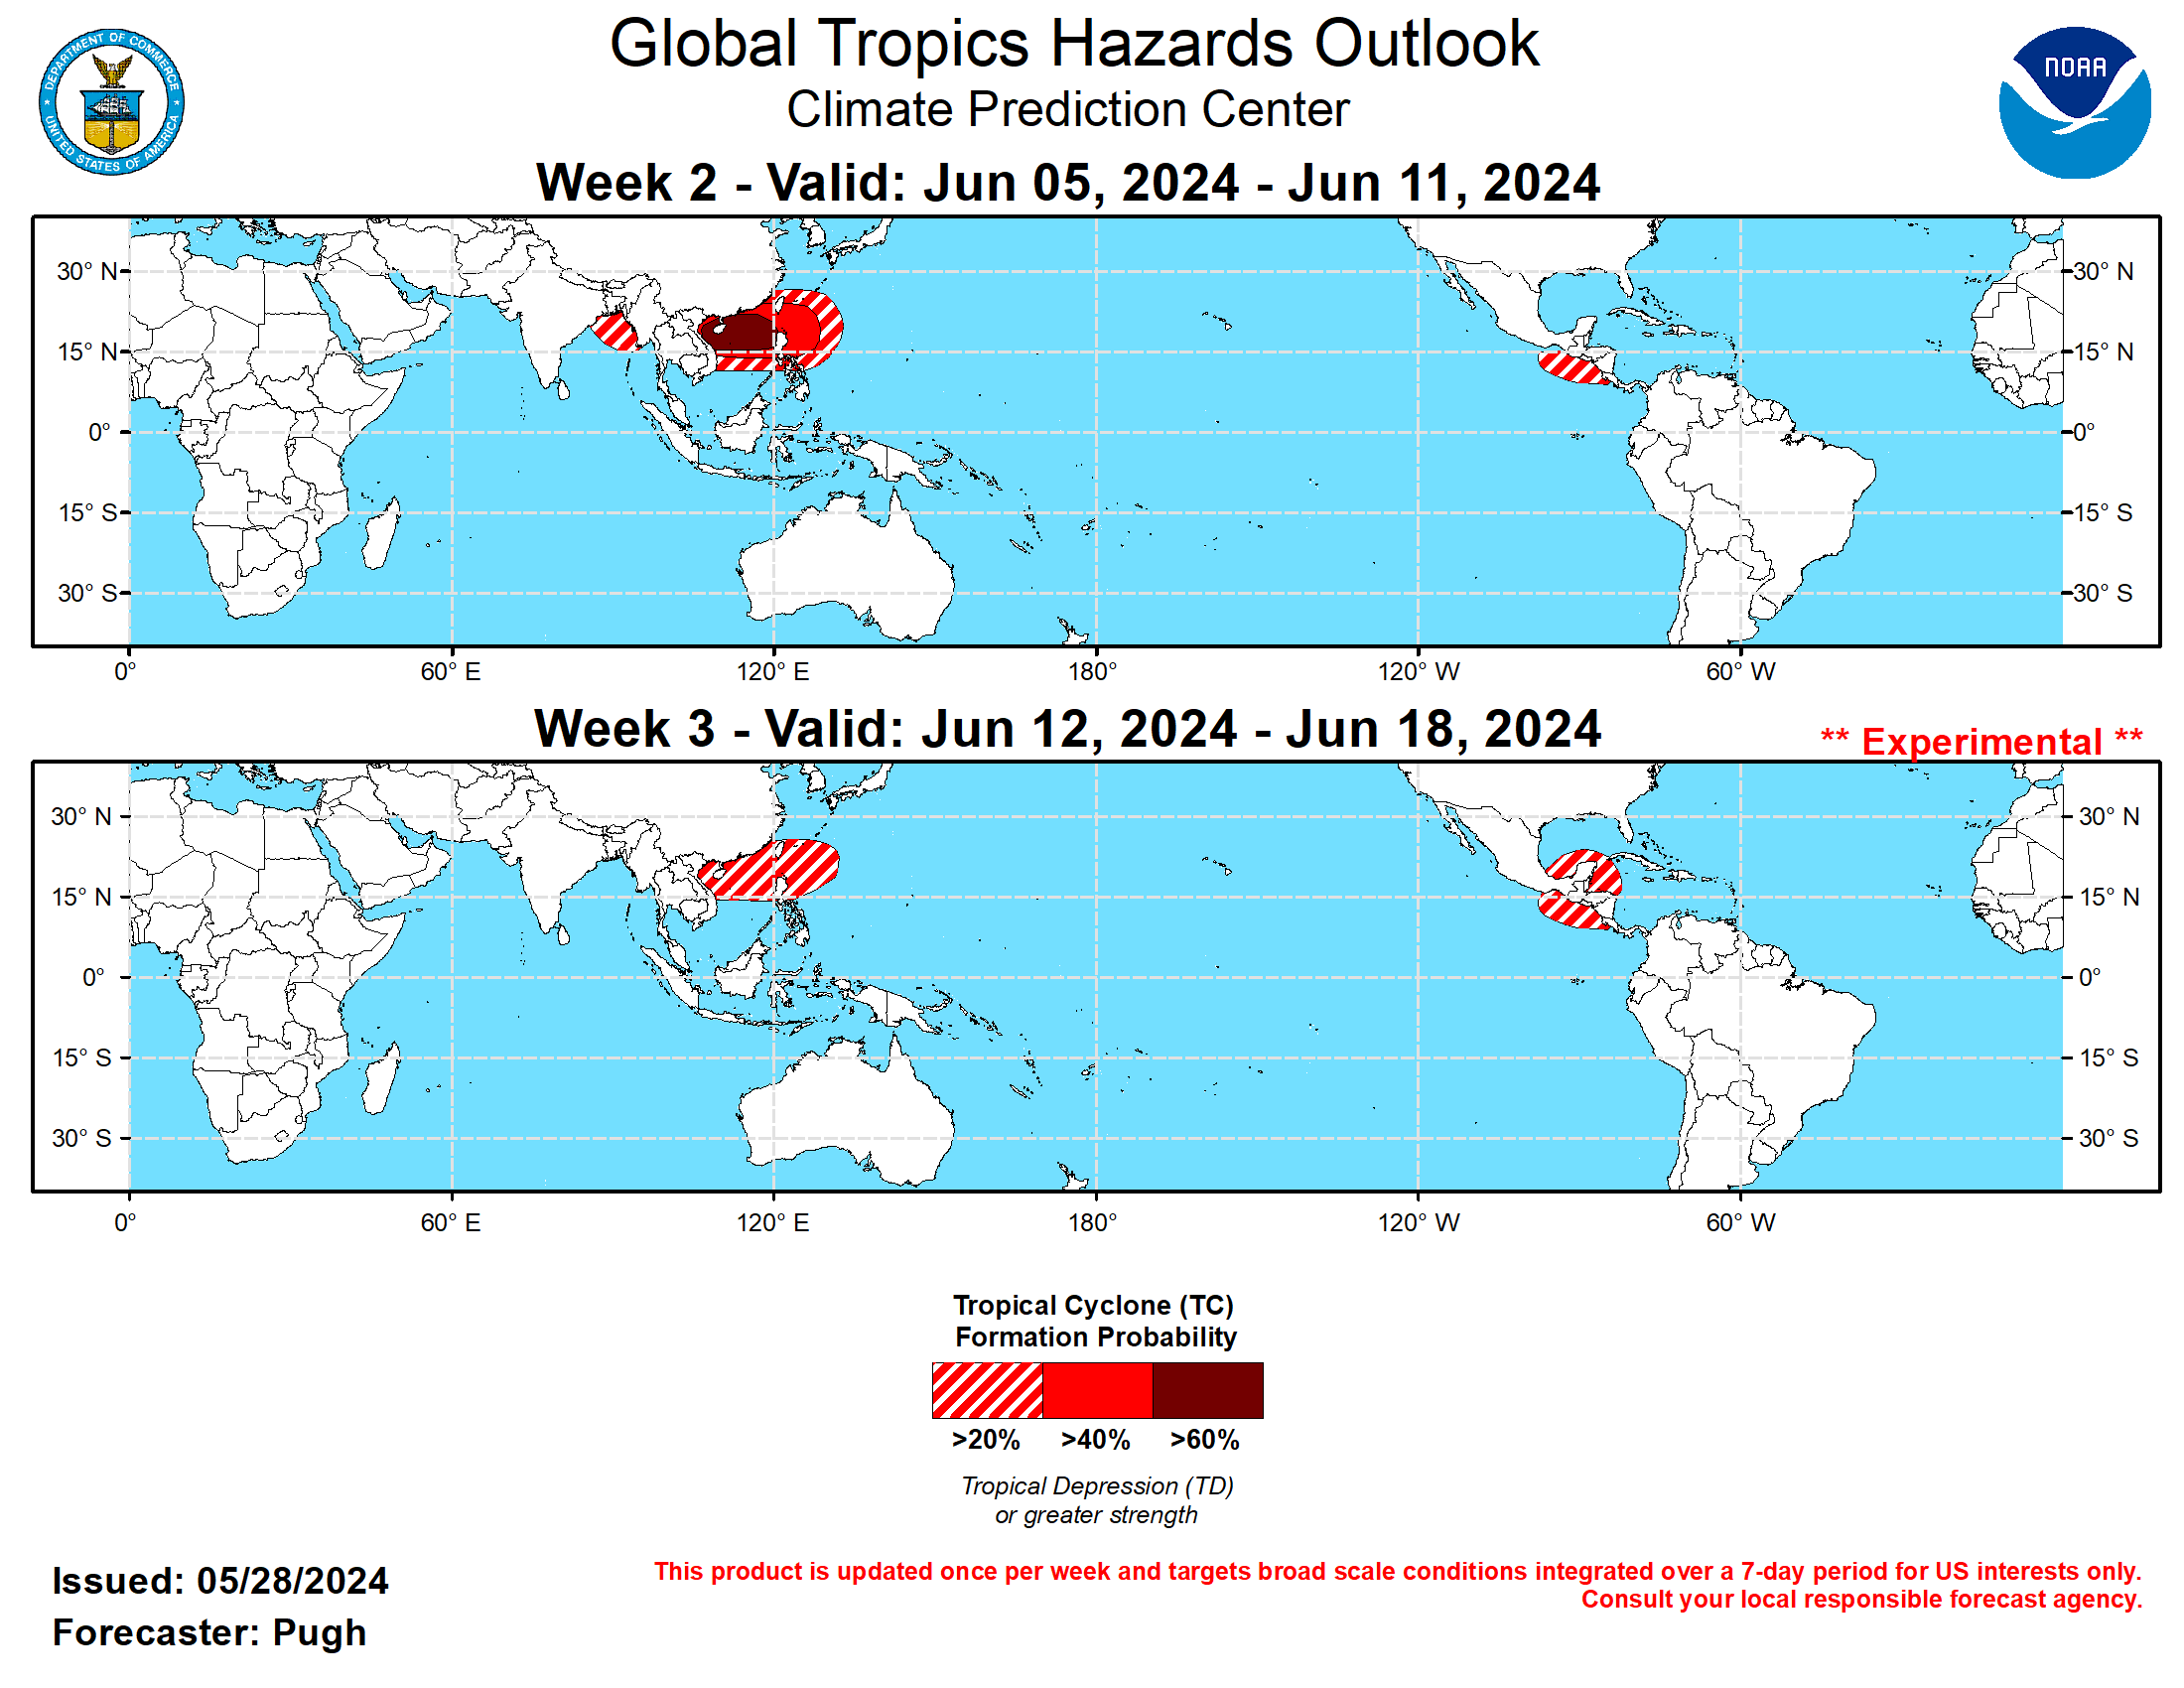 GTH Outlook Discussion Last Updated - 05/28/24 Valid - 06/05/24 - 06/18/24 The MJO strengthened and propagated eastward over the Indian Ocean during the latter half of May. The RMM-based MJO index depicts this amplitude increase since mid-May with a eastward shift from phase 2 (Indian Ocean) to phase 4 (Maritime Continent). The 200-hPa velocity potential anomaly observations became more coherent with a wave-1 pattern this past week, featuring enhanced upper-level divergence (convergence) over the eastern (western) Hemisphere. According to the ECMWF model forecasts of the RMM-based index and 200-hPa velocity potential anomalies, the MJO would continue propagating eastward through mid-June with its enhanced phase overspreading the Americas and tropical Atlantic during weeks 2 and 3. However, the GEFS favors a slower speed with anomalous upper-level divergence only making it to around the Date Line by week-3. Also, a larger spread exists among the GEFS members with its RMM index forecasts.  Tropical Cyclone Remal developed over the Bay of Bengal on May 25 and then tracked to the north, making landfall near the border of Bangladesh and India. Heavy rainfall (locally more than 200 mm) triggered flooding across northeastern India and Bangladesh. The first tropical cyclone (TC) in the West Pacific basin of 2024 formed on May 25, as Ewiniar developed near Luzon of the Philippines. The Joint Typhoon Warning Center indicates that Ewiniar tracks northeast and gradually weakens when it reaches the middle latitudes near or offshore of central Japan. During week-2 (June 5-11), the most likely area (> 60 percent chance) for TC genesis is forecast across the South China Sea which is supported by dynamical models and MJO composites for phase 6. A broader 40 to 60 percent area for TC genesis extends east of the Philippines. The GEFS and ECMWF models favor a 20 to 40 percent chance of TC development across the northeastern Bay of Bengal for week-2. By week-3 (June 12-18), the outlook for favored areas of TC genesis becomes more uncertain due to diverging model solutions on the MJO evolution. Based on MJO composites for phase 7 and recent model support, a 20 to 40 percent chance of TC development is posted for the South China Sea and to the northeast of the Philippines. Based largely on the ECMWF model, a 20 to 40 percent chance of TC development is posted for the East Pacific during week-2 and this slightly favored area expands east to include the western Caribbean Sea and southwestern Gulf of Mexic